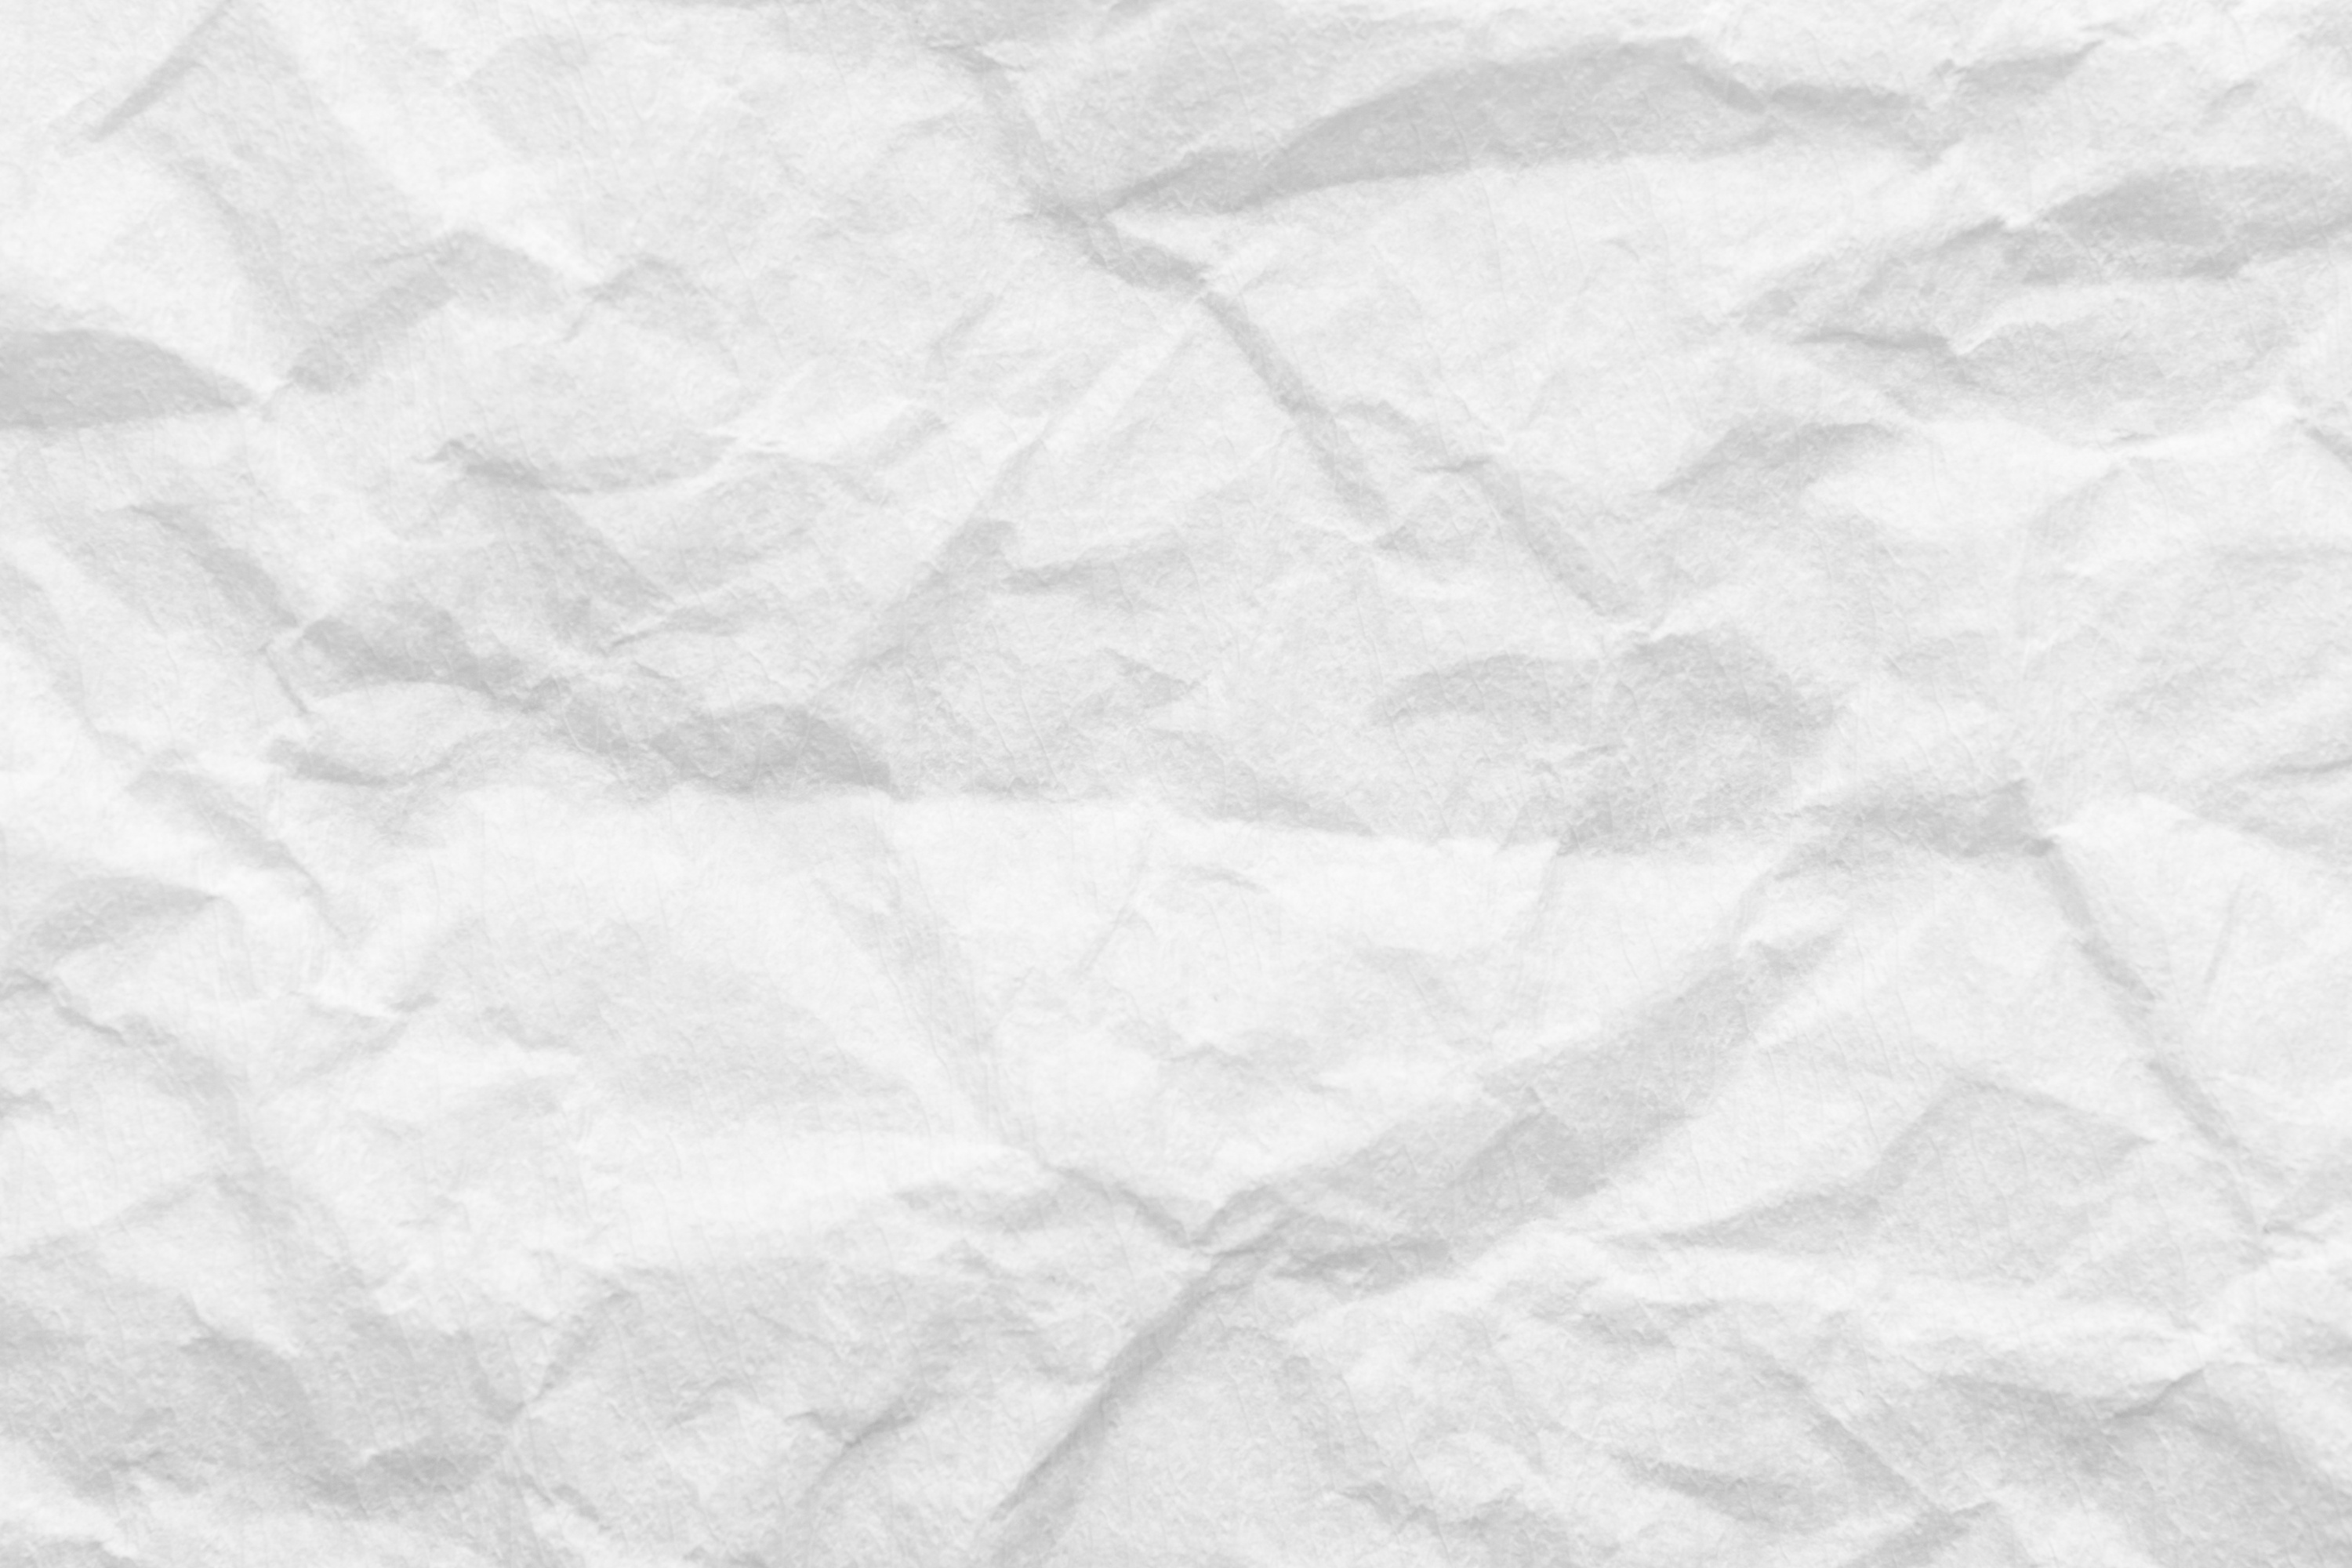 Creased paper white background, paper texture